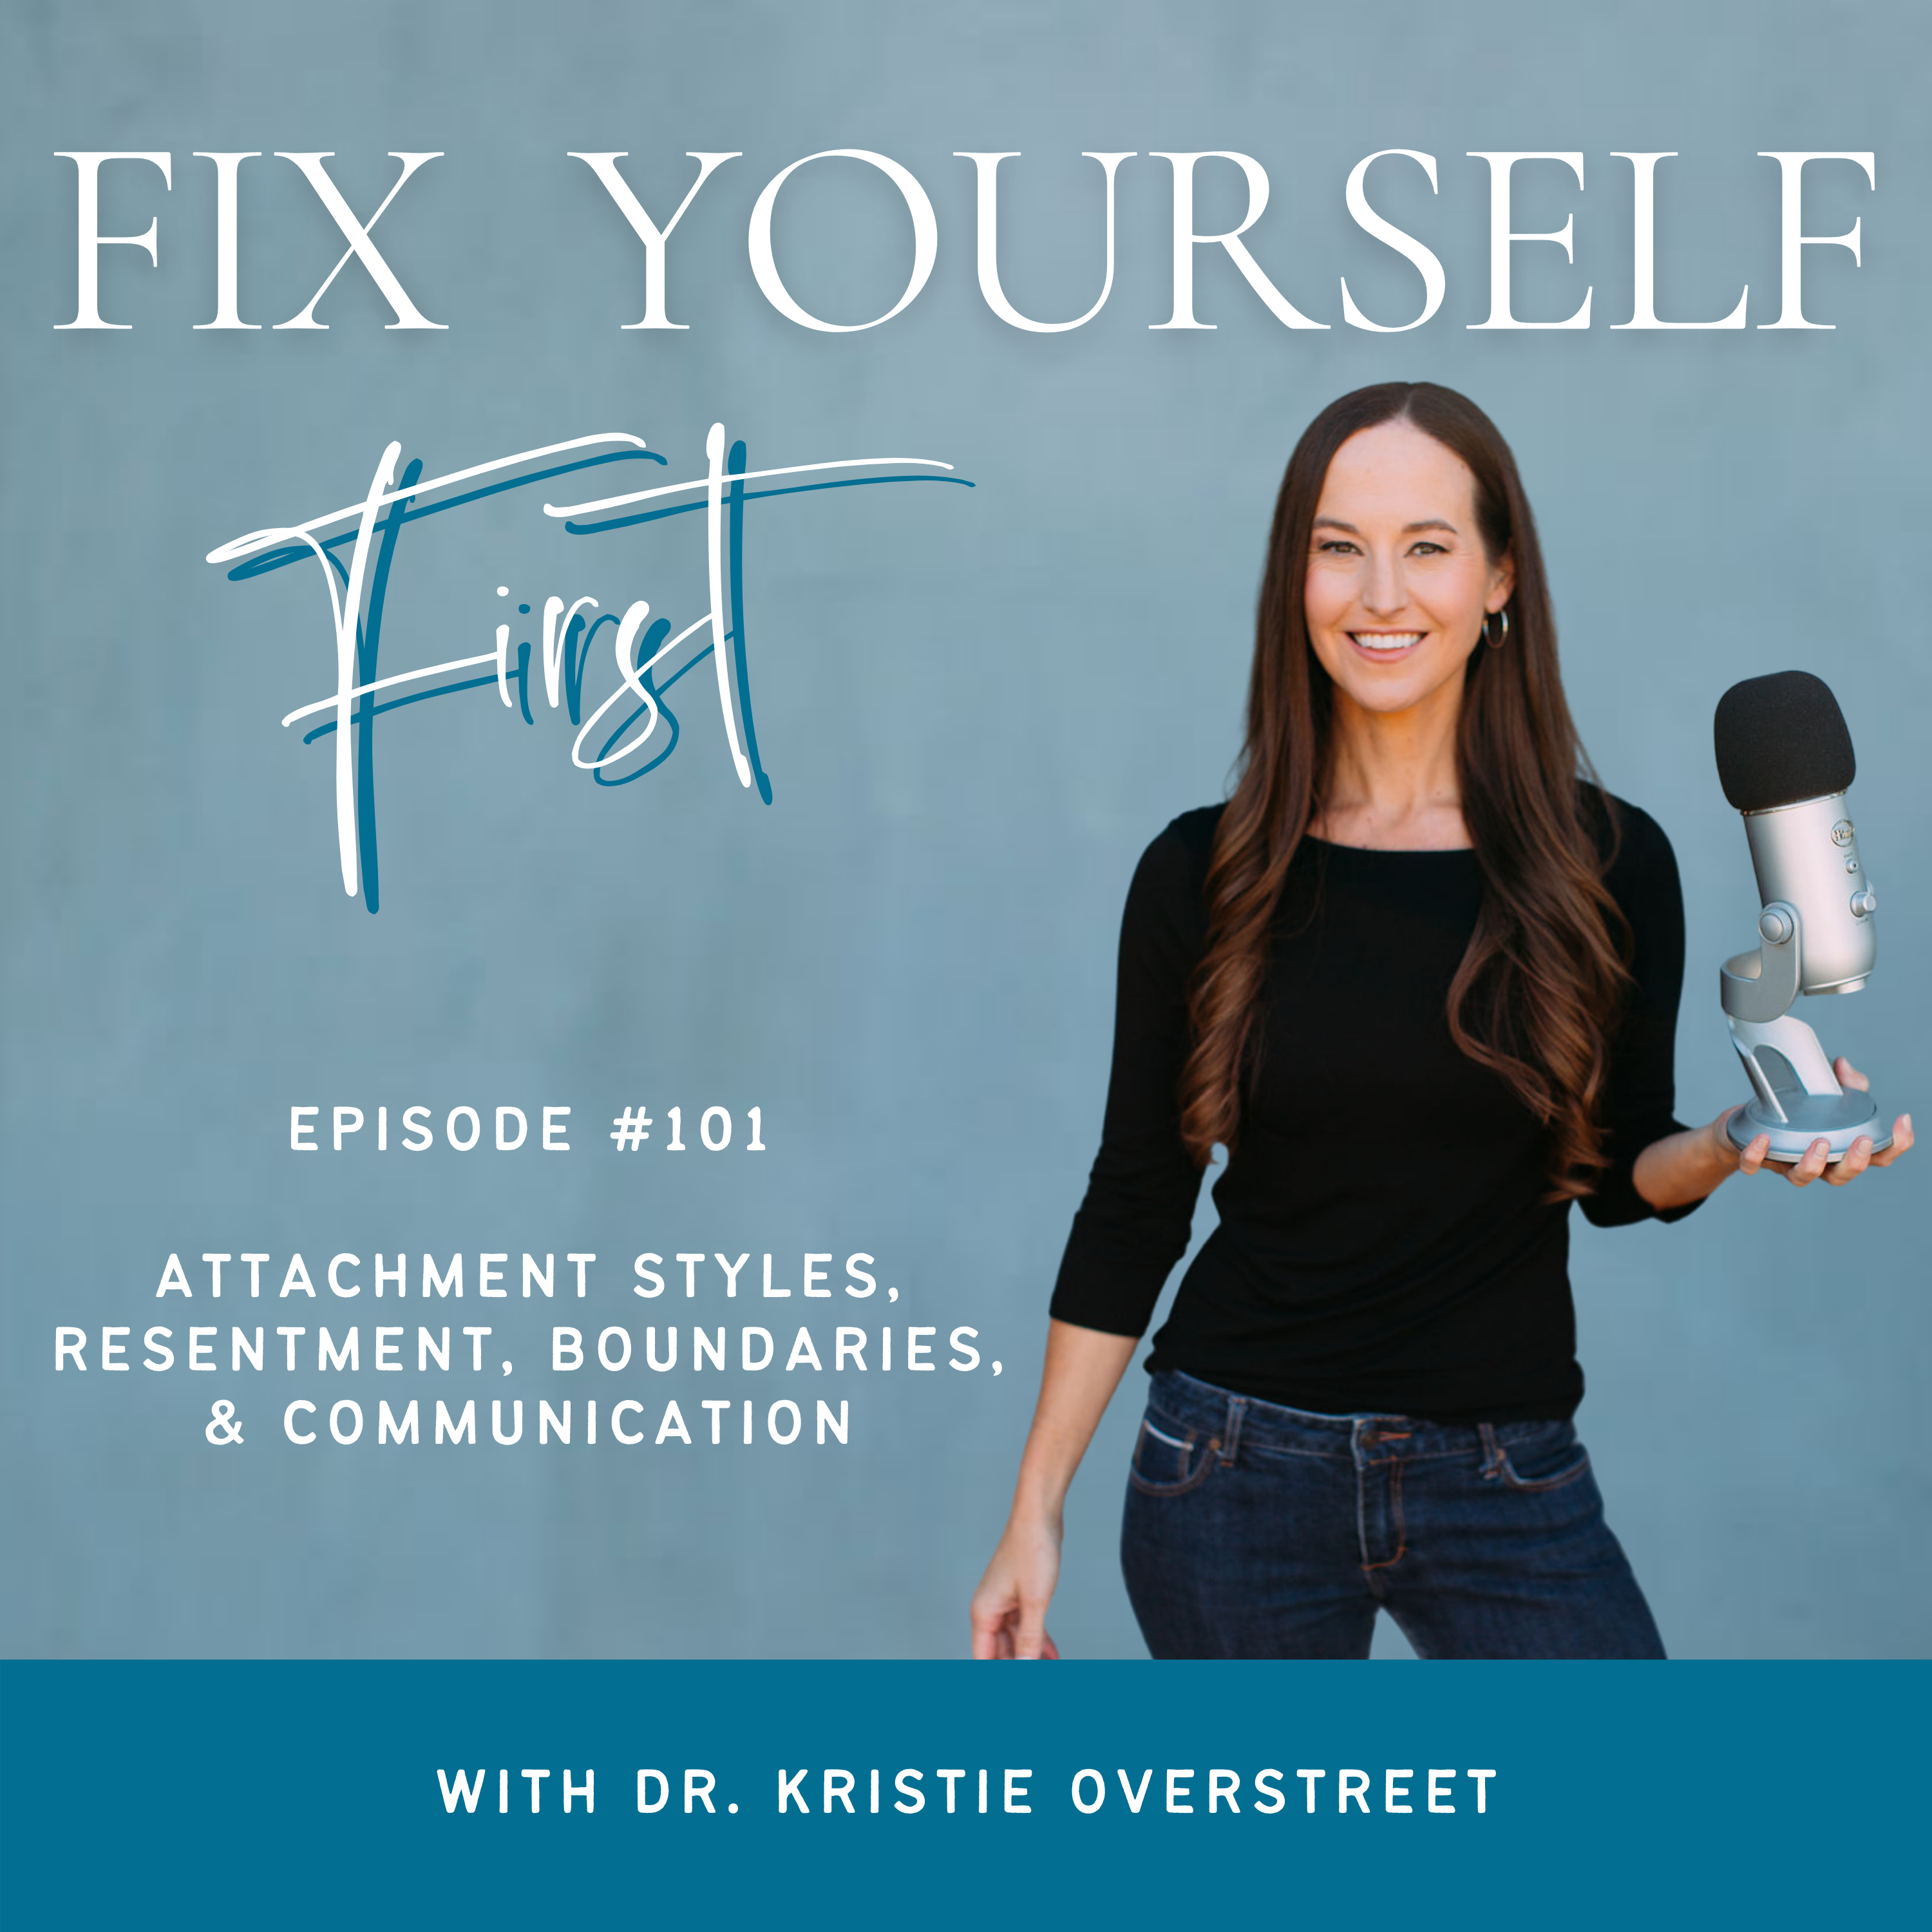 Fix Yourself First Episode 101 Attachment Styles, Resentment, Boundaries, & Communication with Dr. Kristie